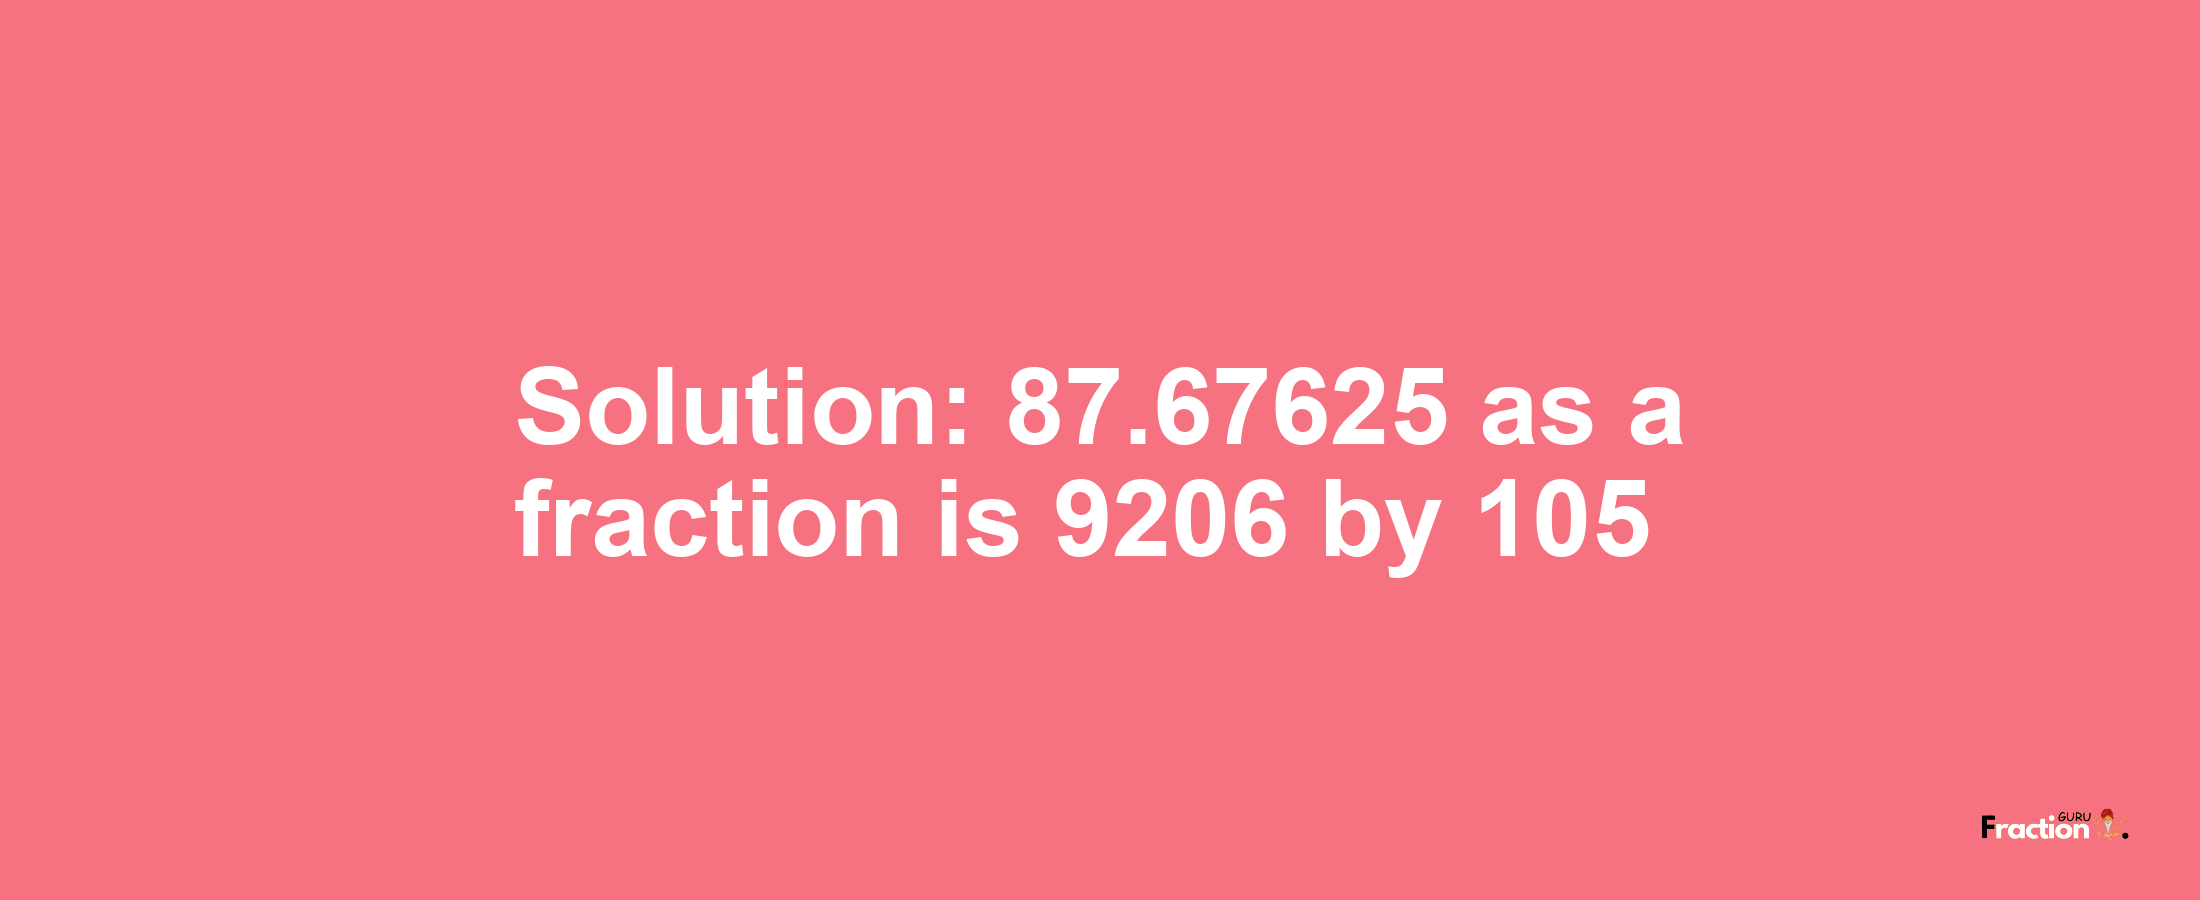 Solution:87.67625 as a fraction is 9206/105